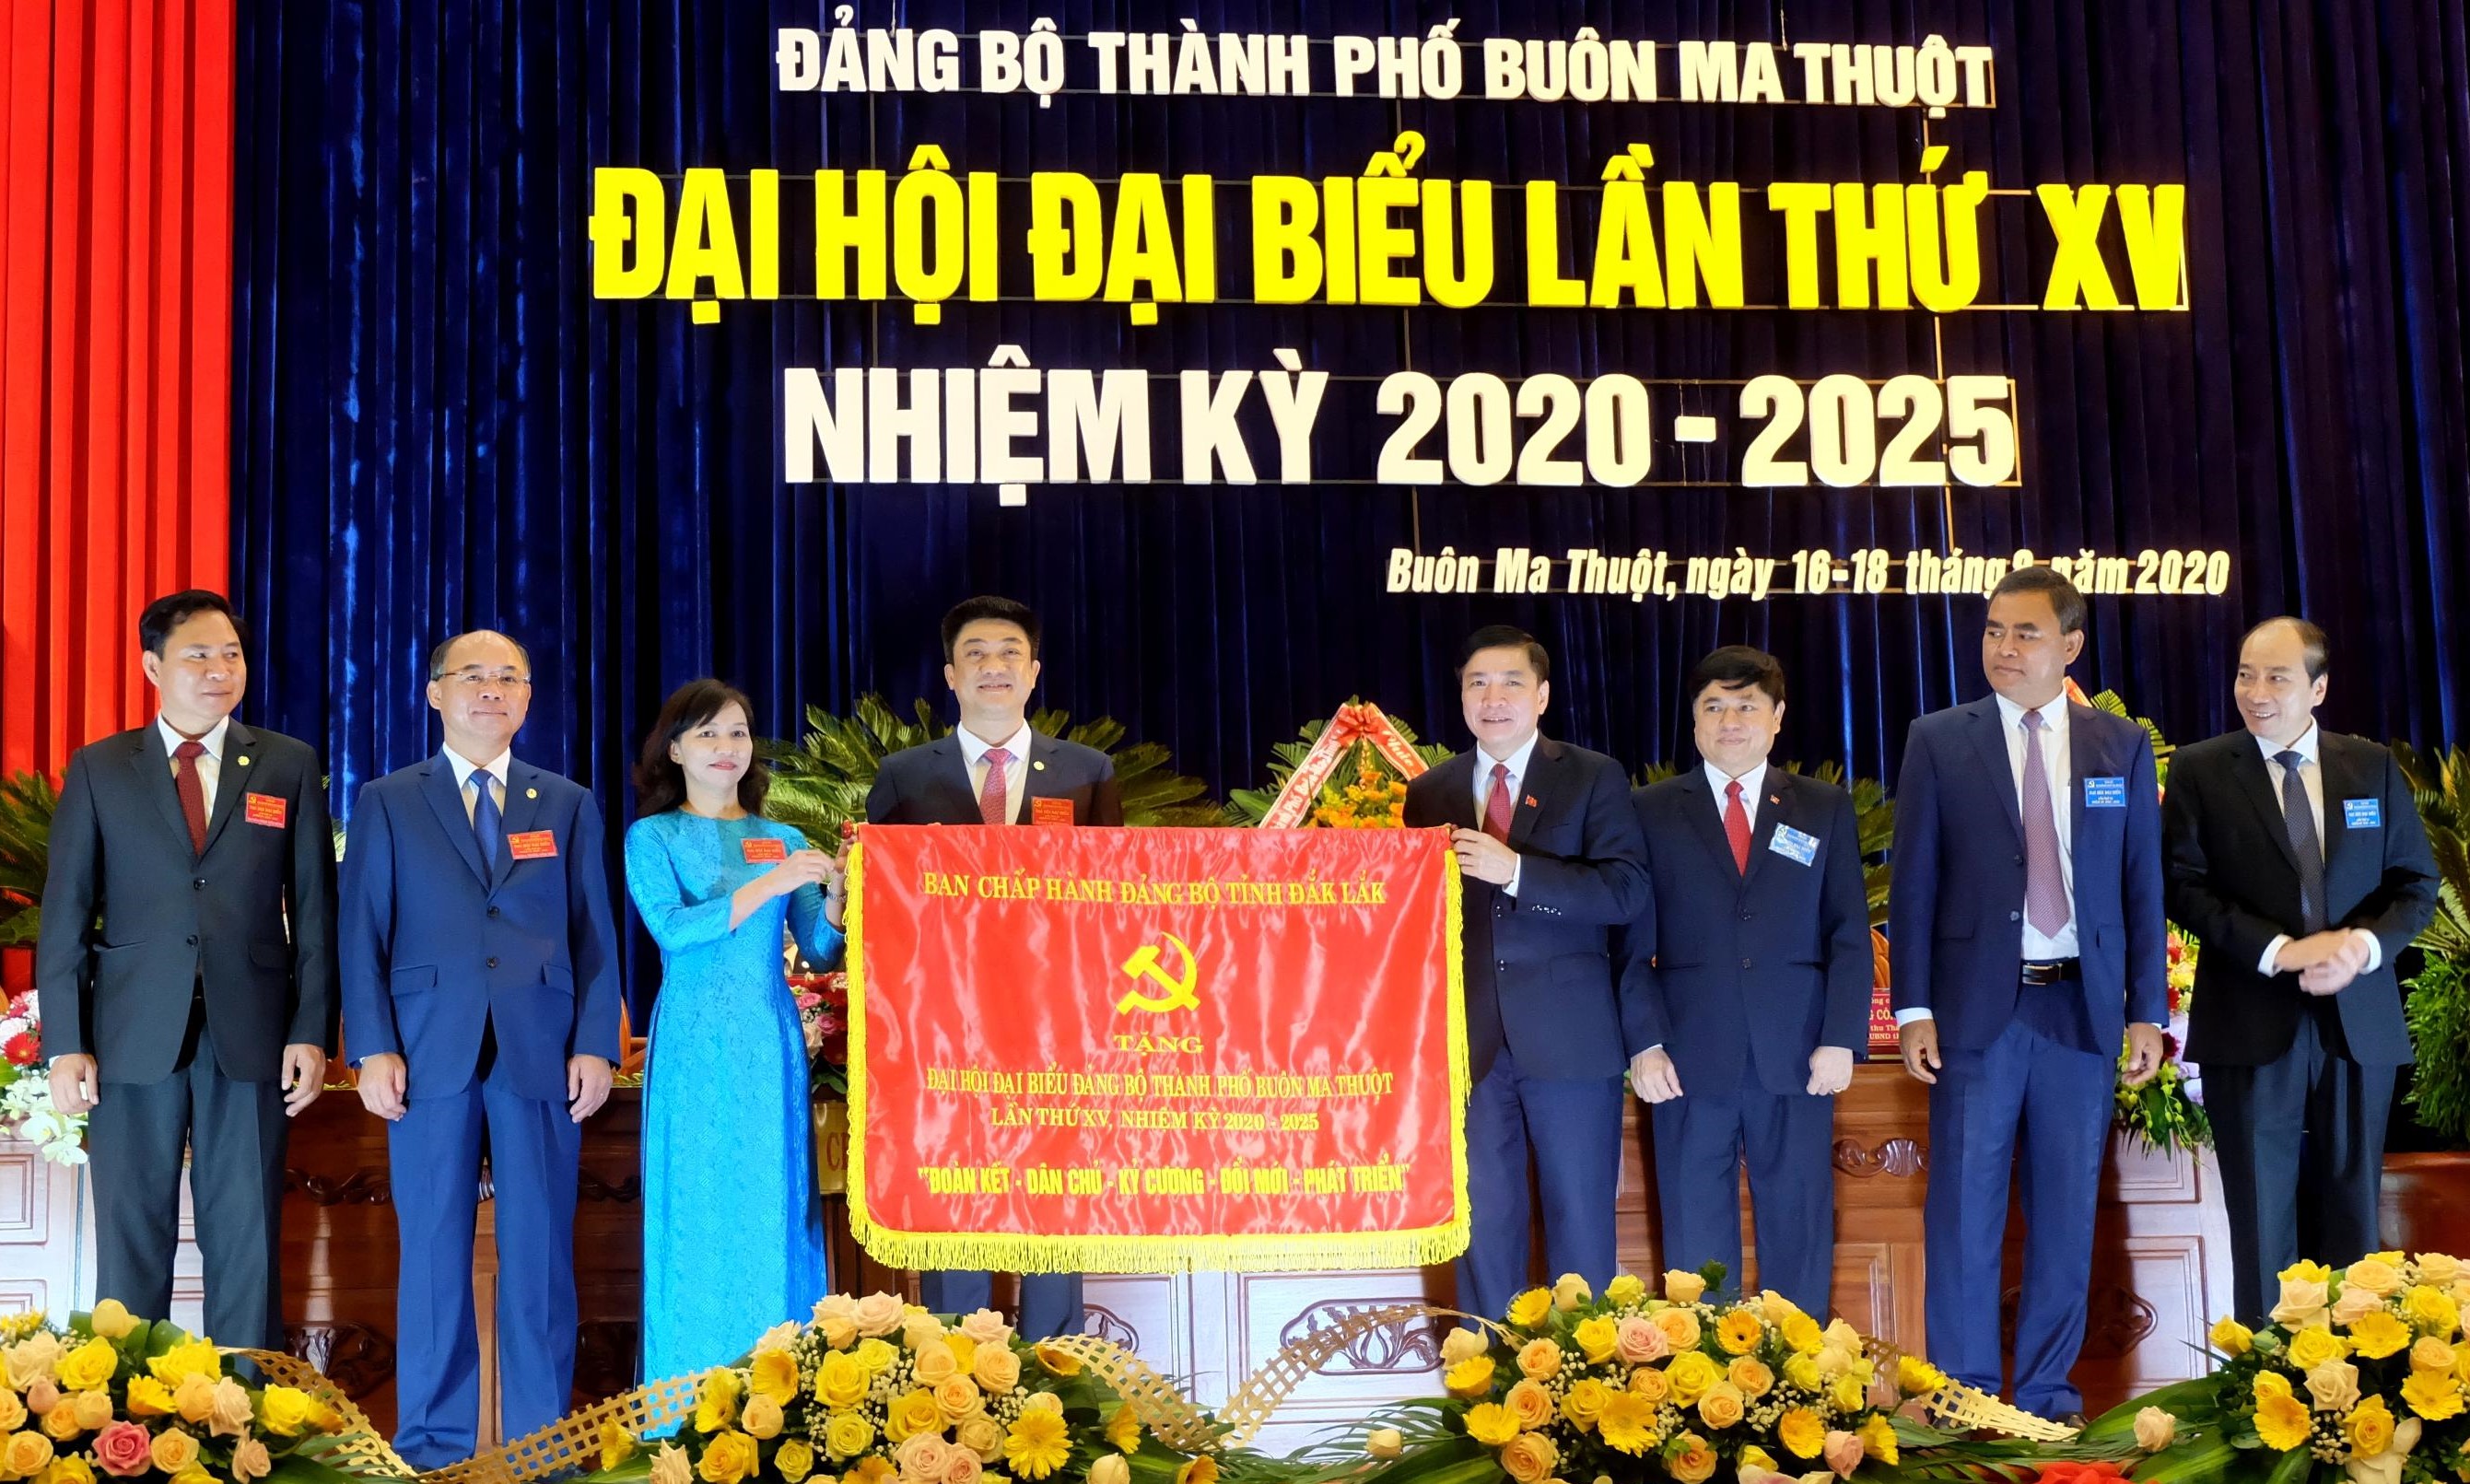 Launching the 15th Party Congress of Buon Ma Thuot city, 2020-2025 tenure